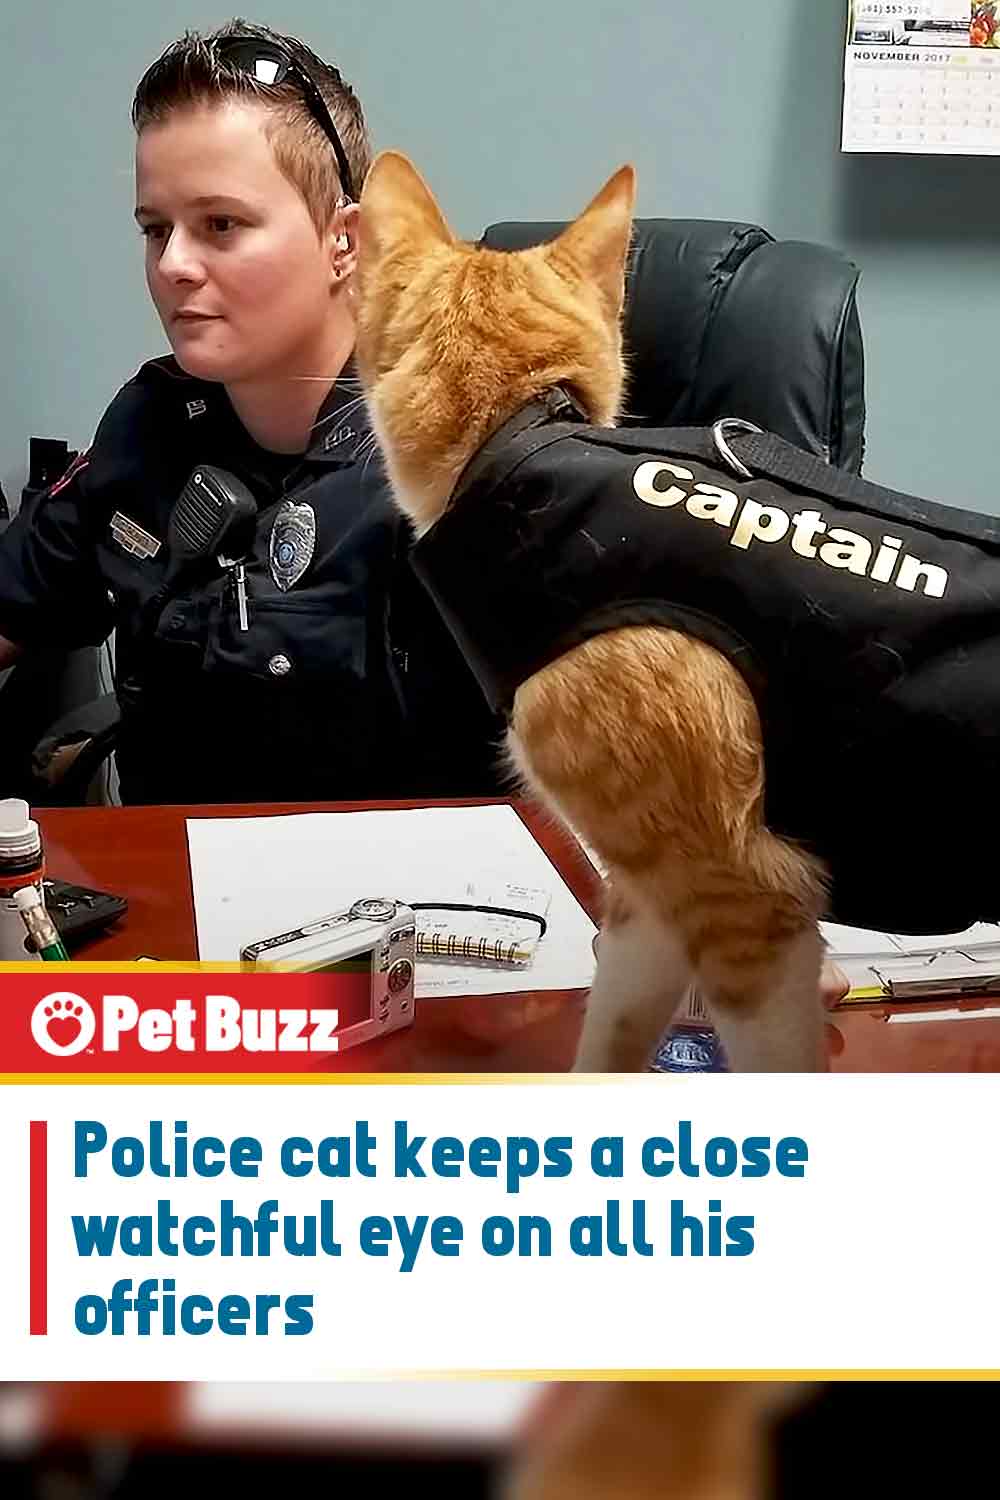 Police cat keeps a close watchful eye on all his officers